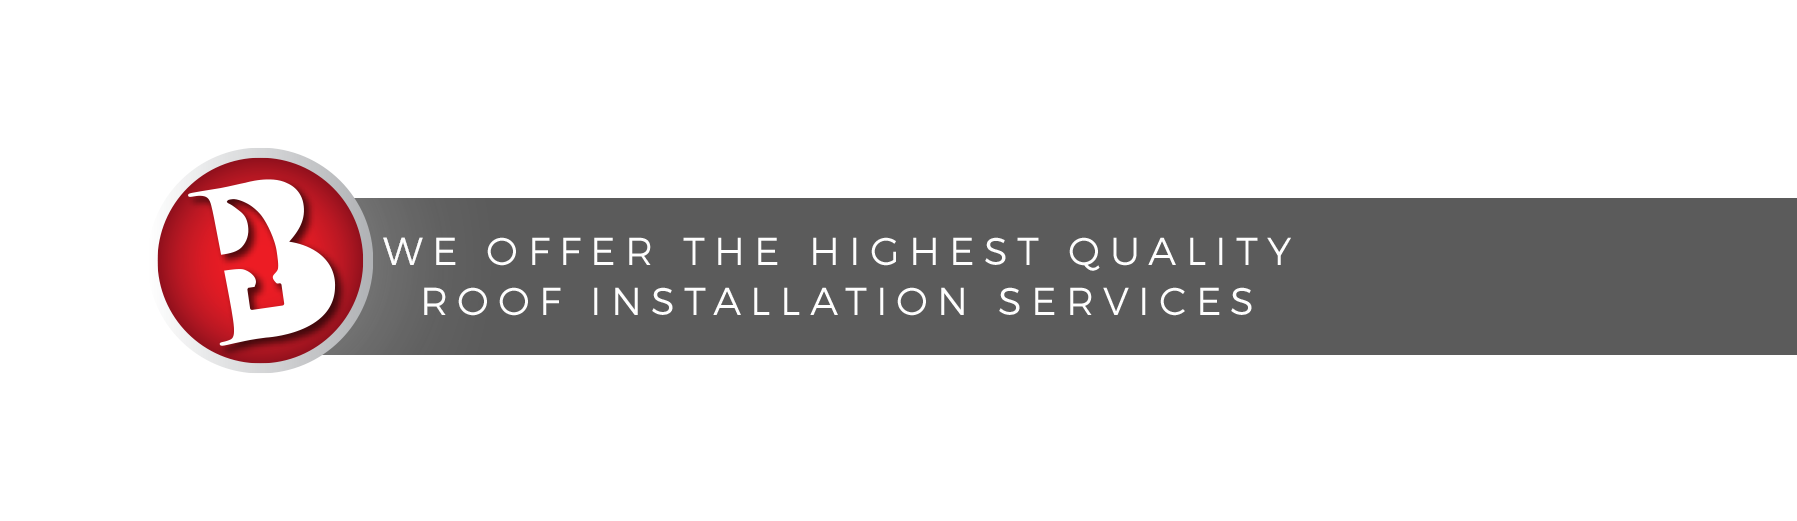 Bachmans High Quality Roof Installation Service Header Image